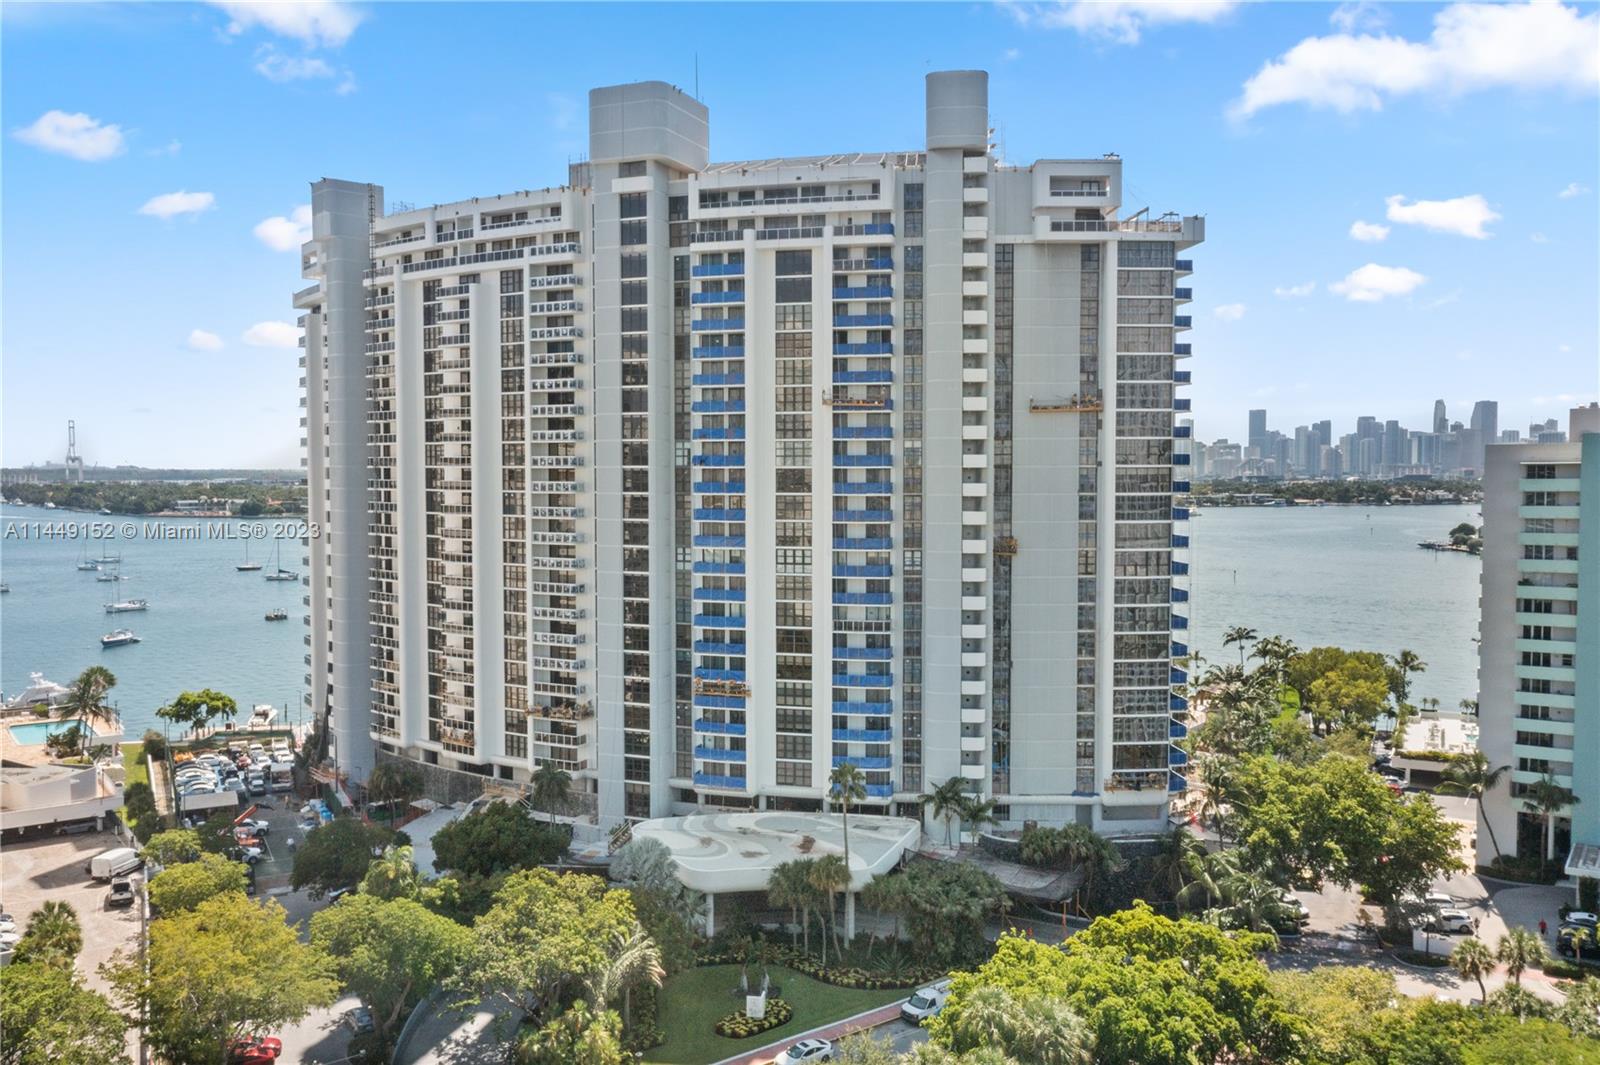 9  Island Ave #1209 For Sale A11449152, FL